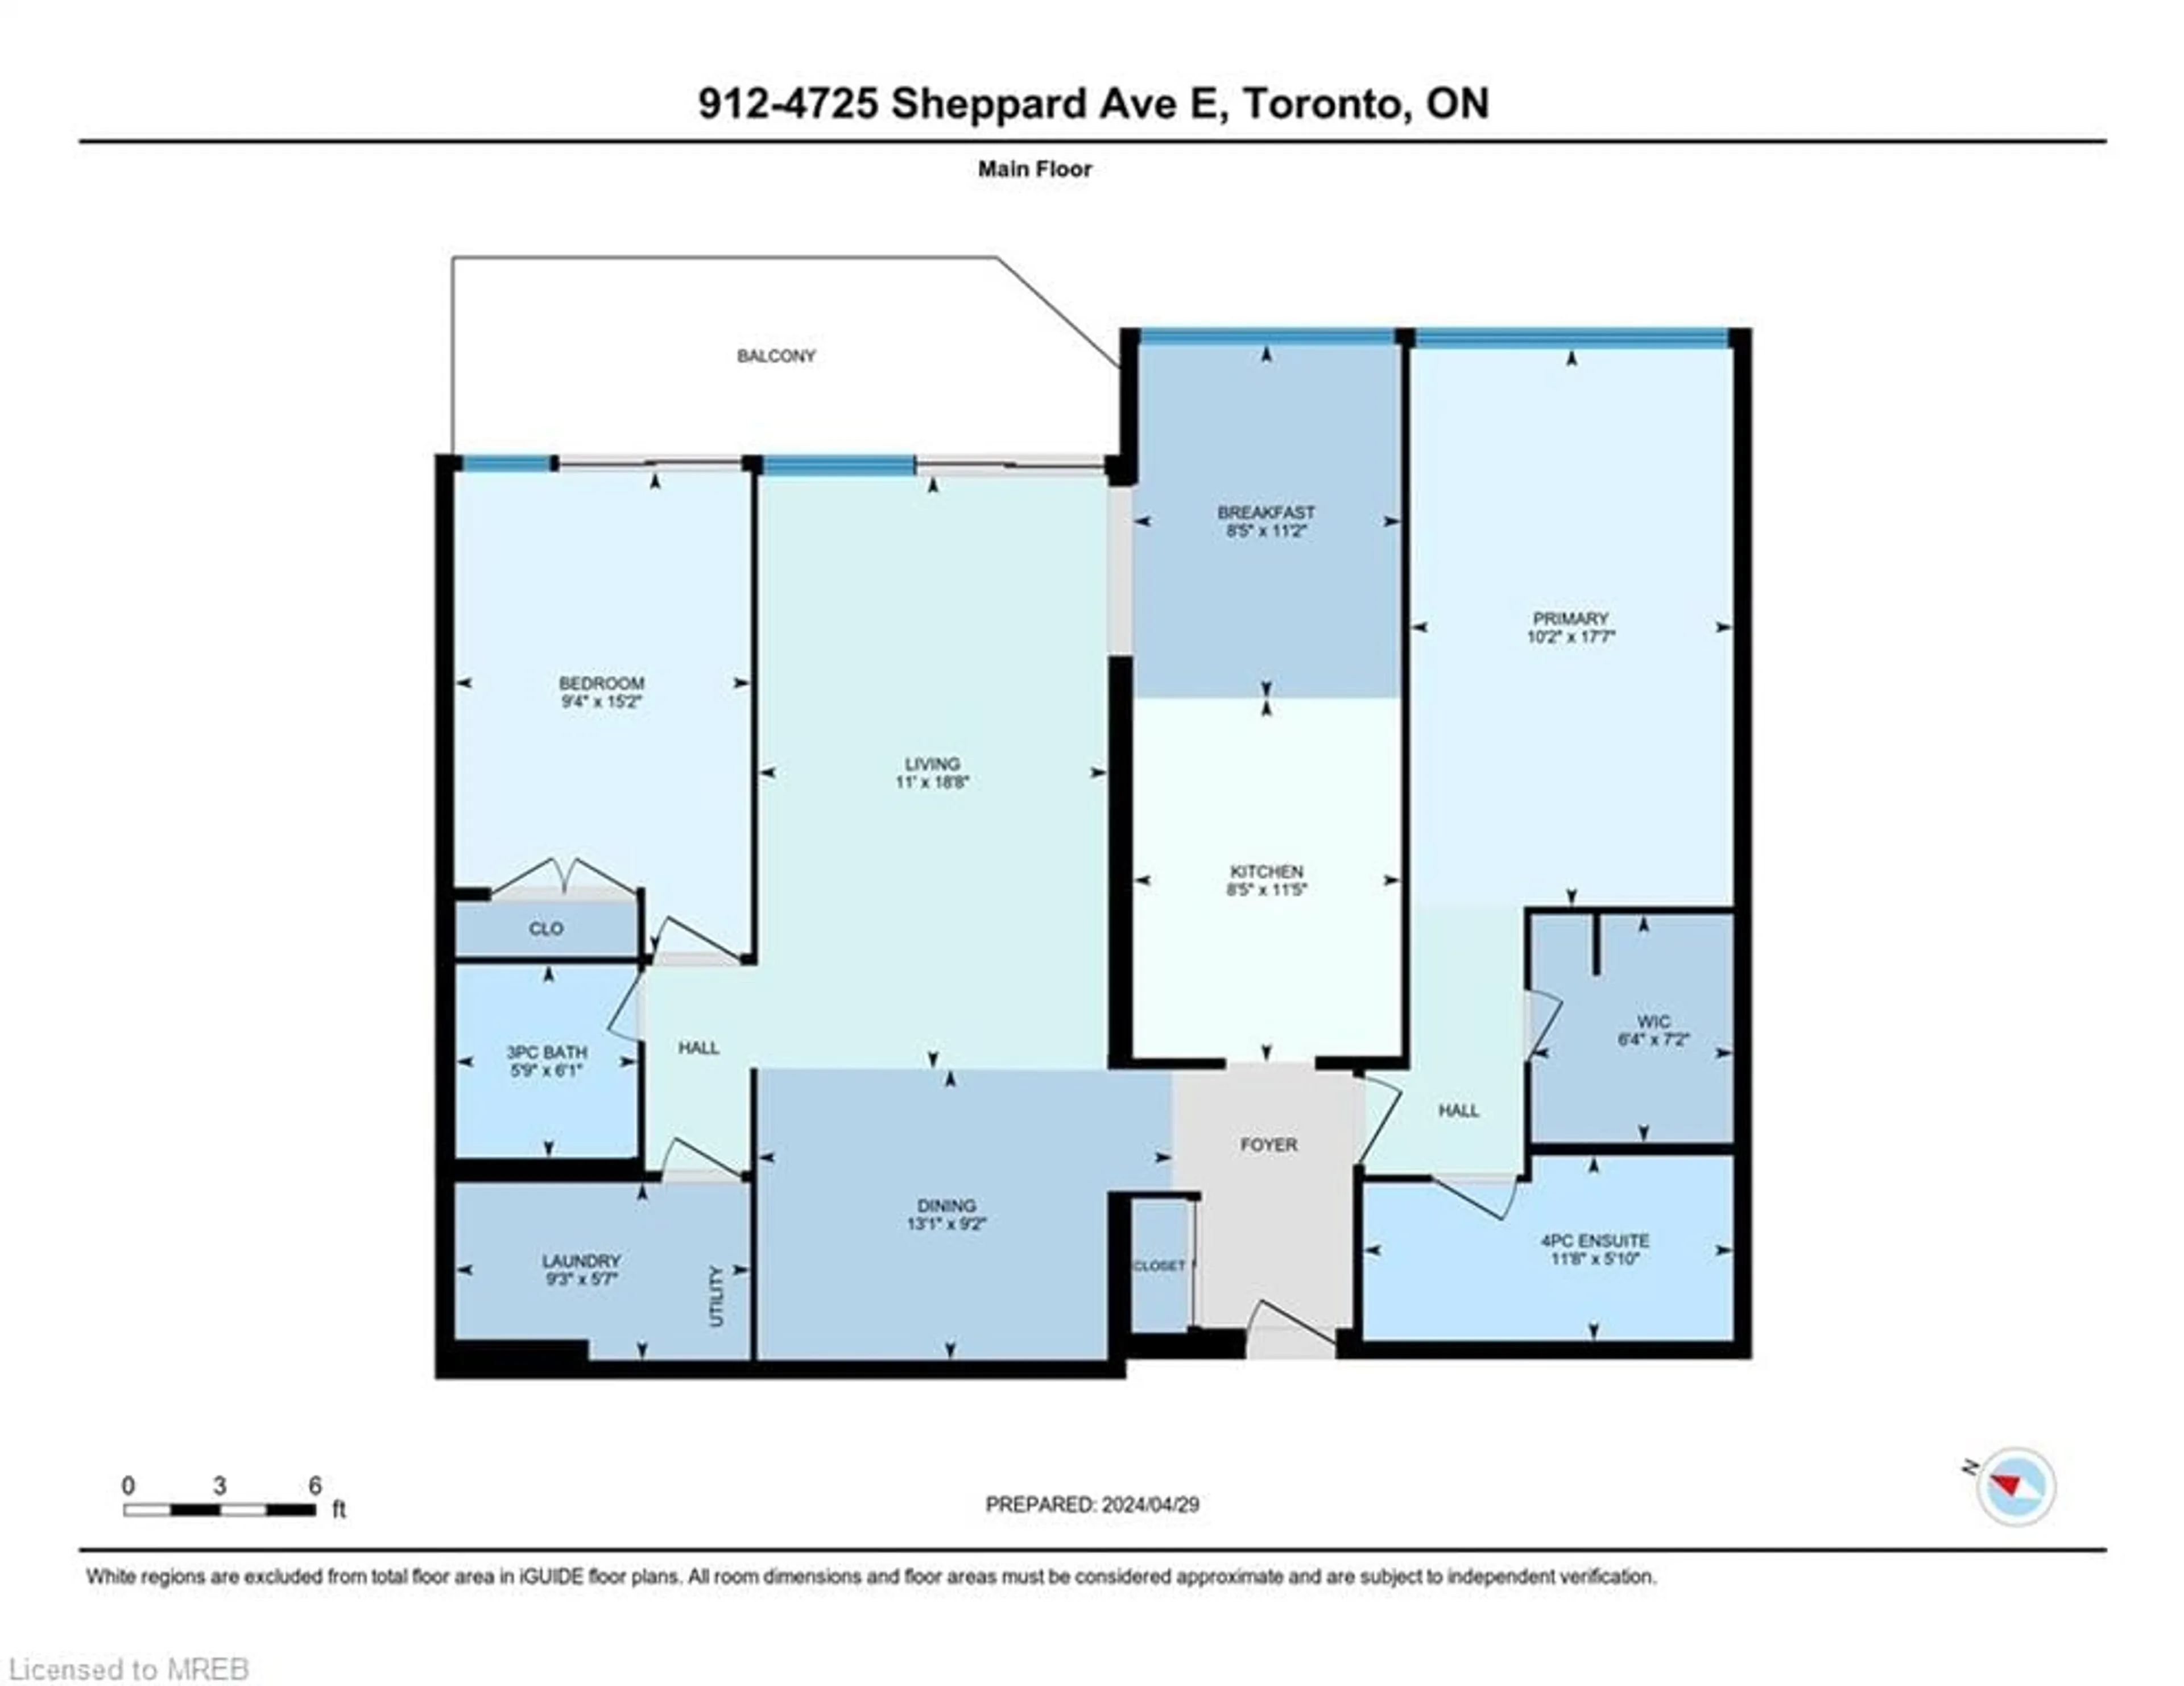 Floor plan for 4725 Sheppard Ave #912, Scarborough Ontario M1S 5B2